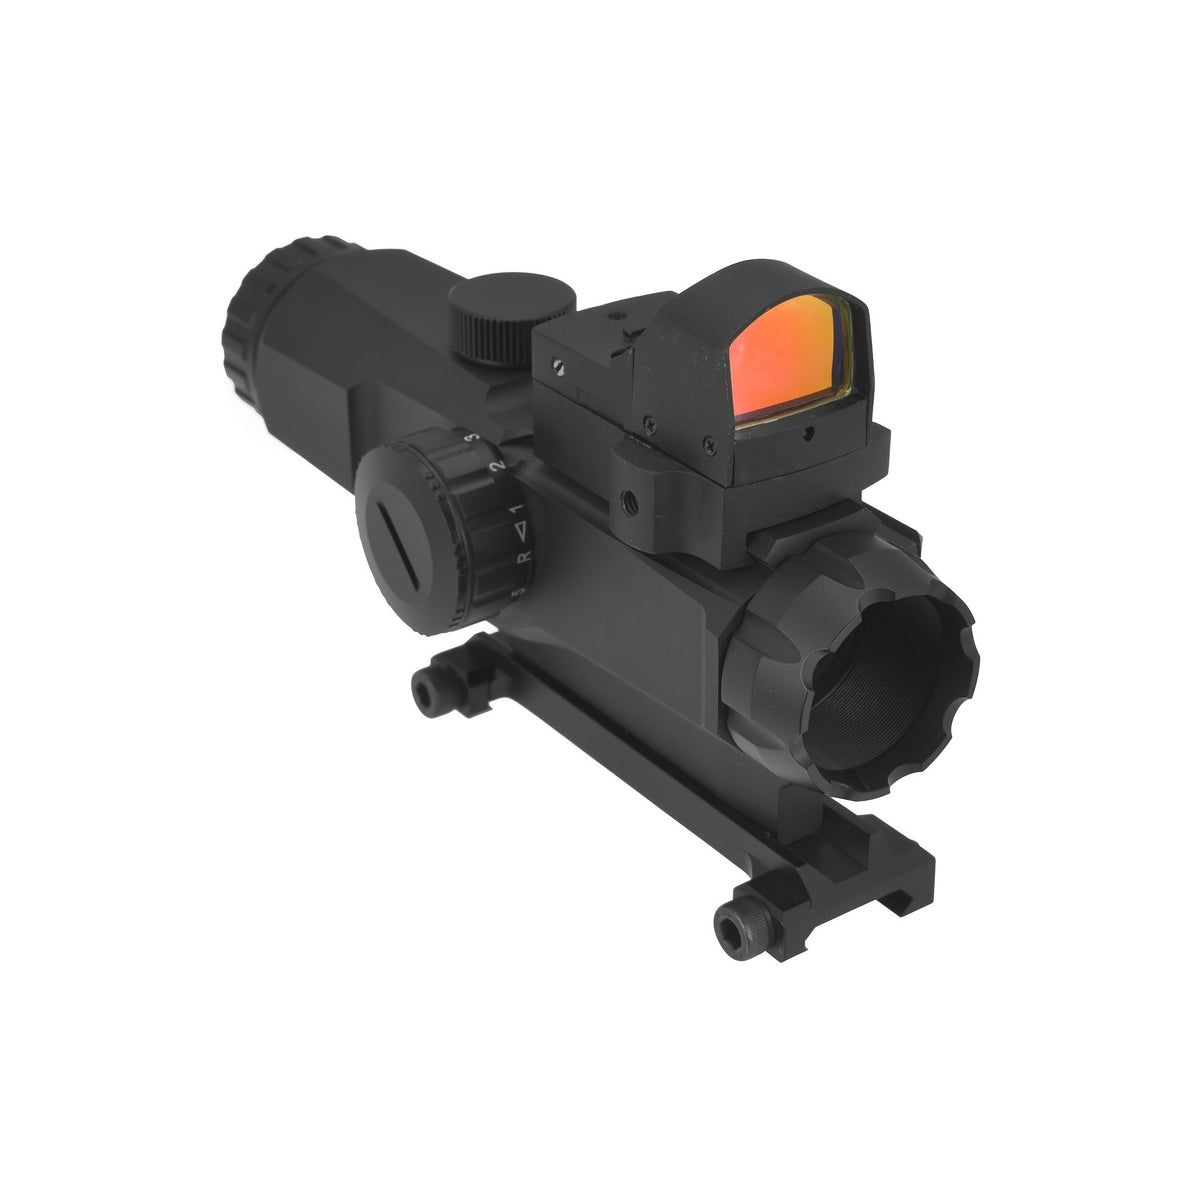 LPHM Mark4 3x24 Scope with Mini Red Dot